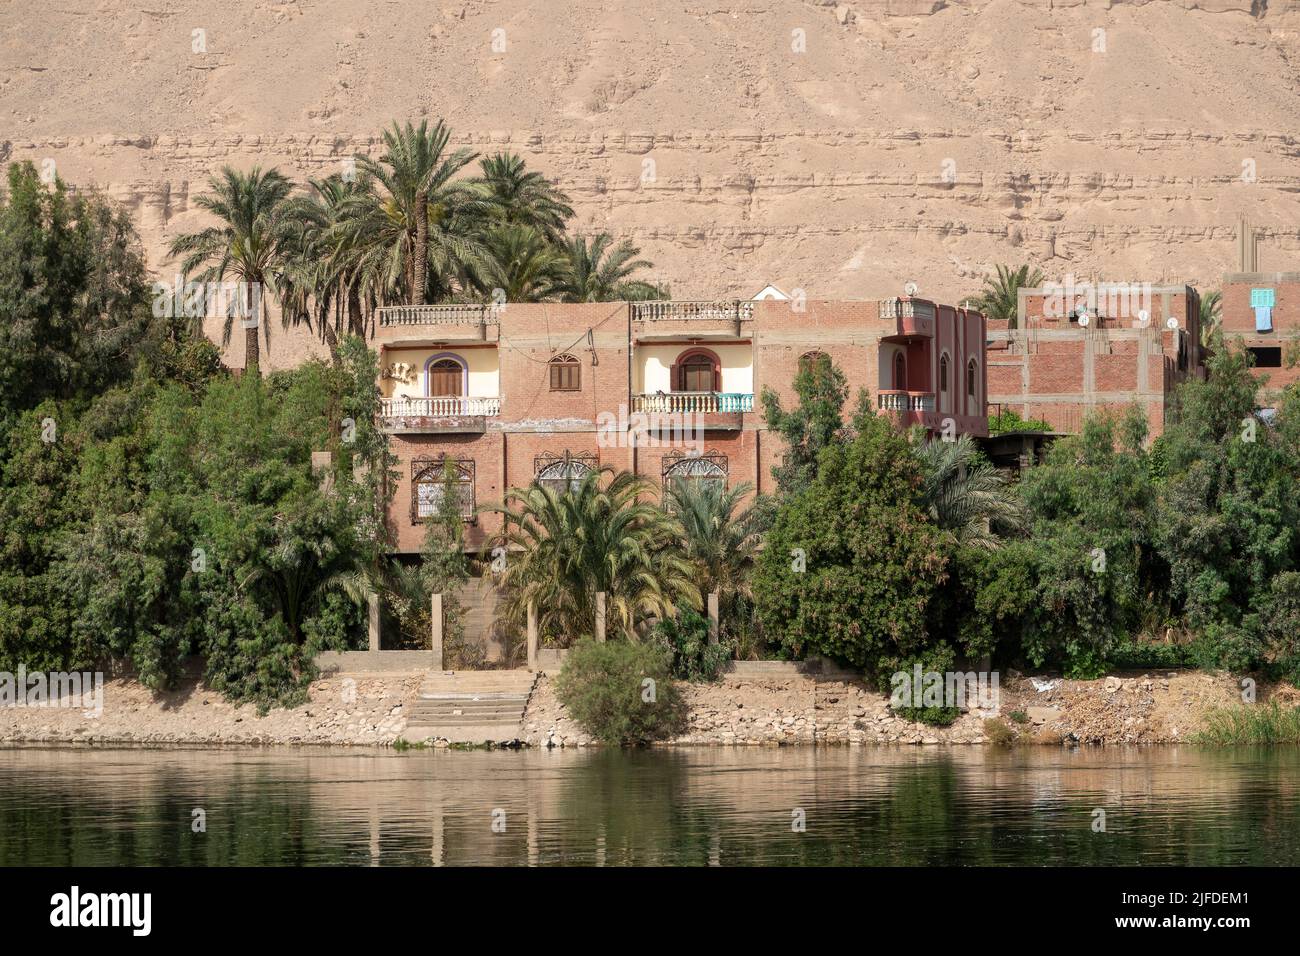 Domestic property on the banks of the river Nile, Egypt Stock Photo